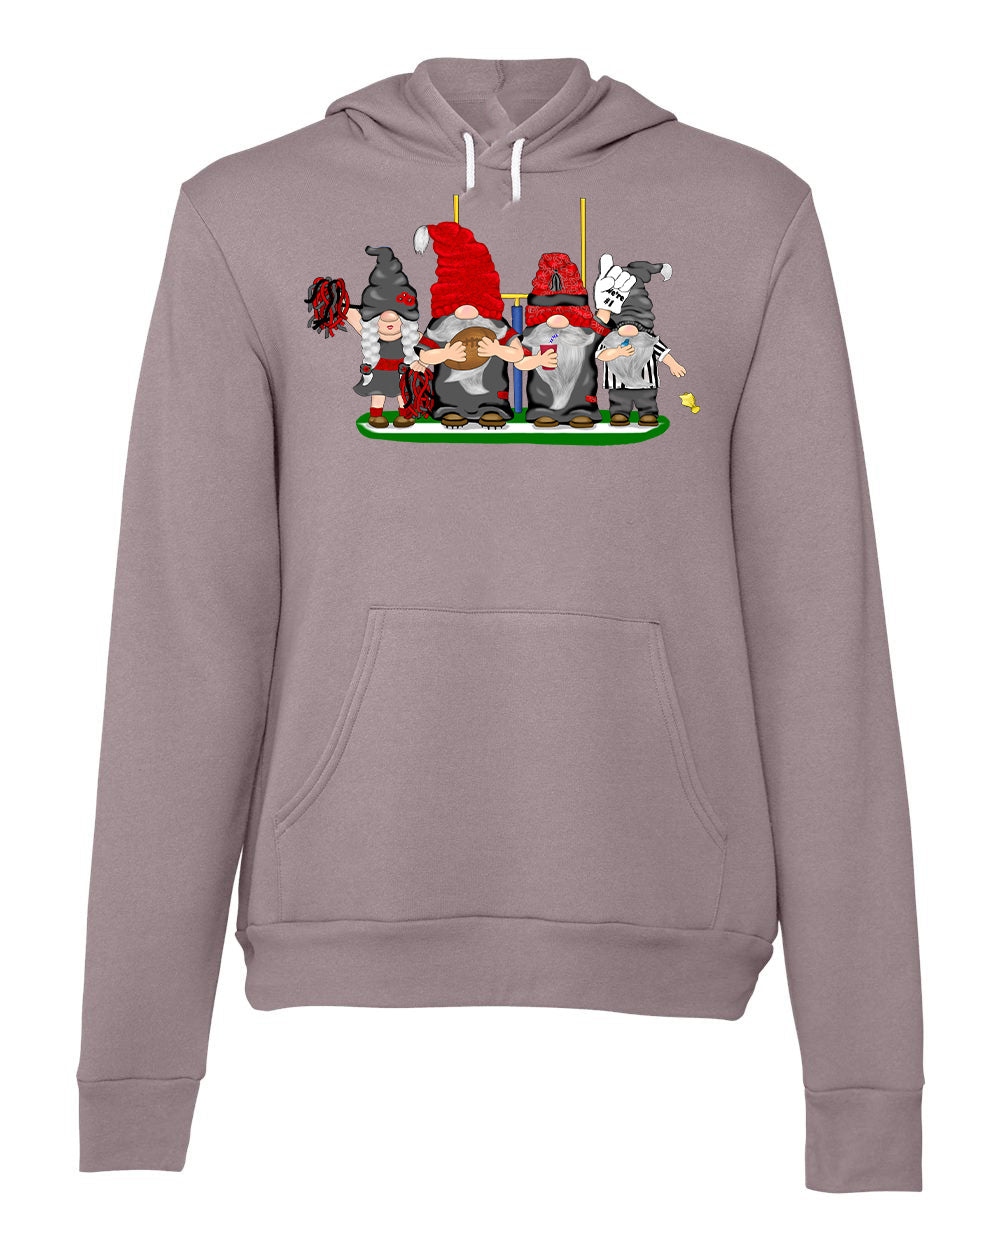 Black & Red Football Gnomes (similar to Tampa Bay) on Unisex Hoodie